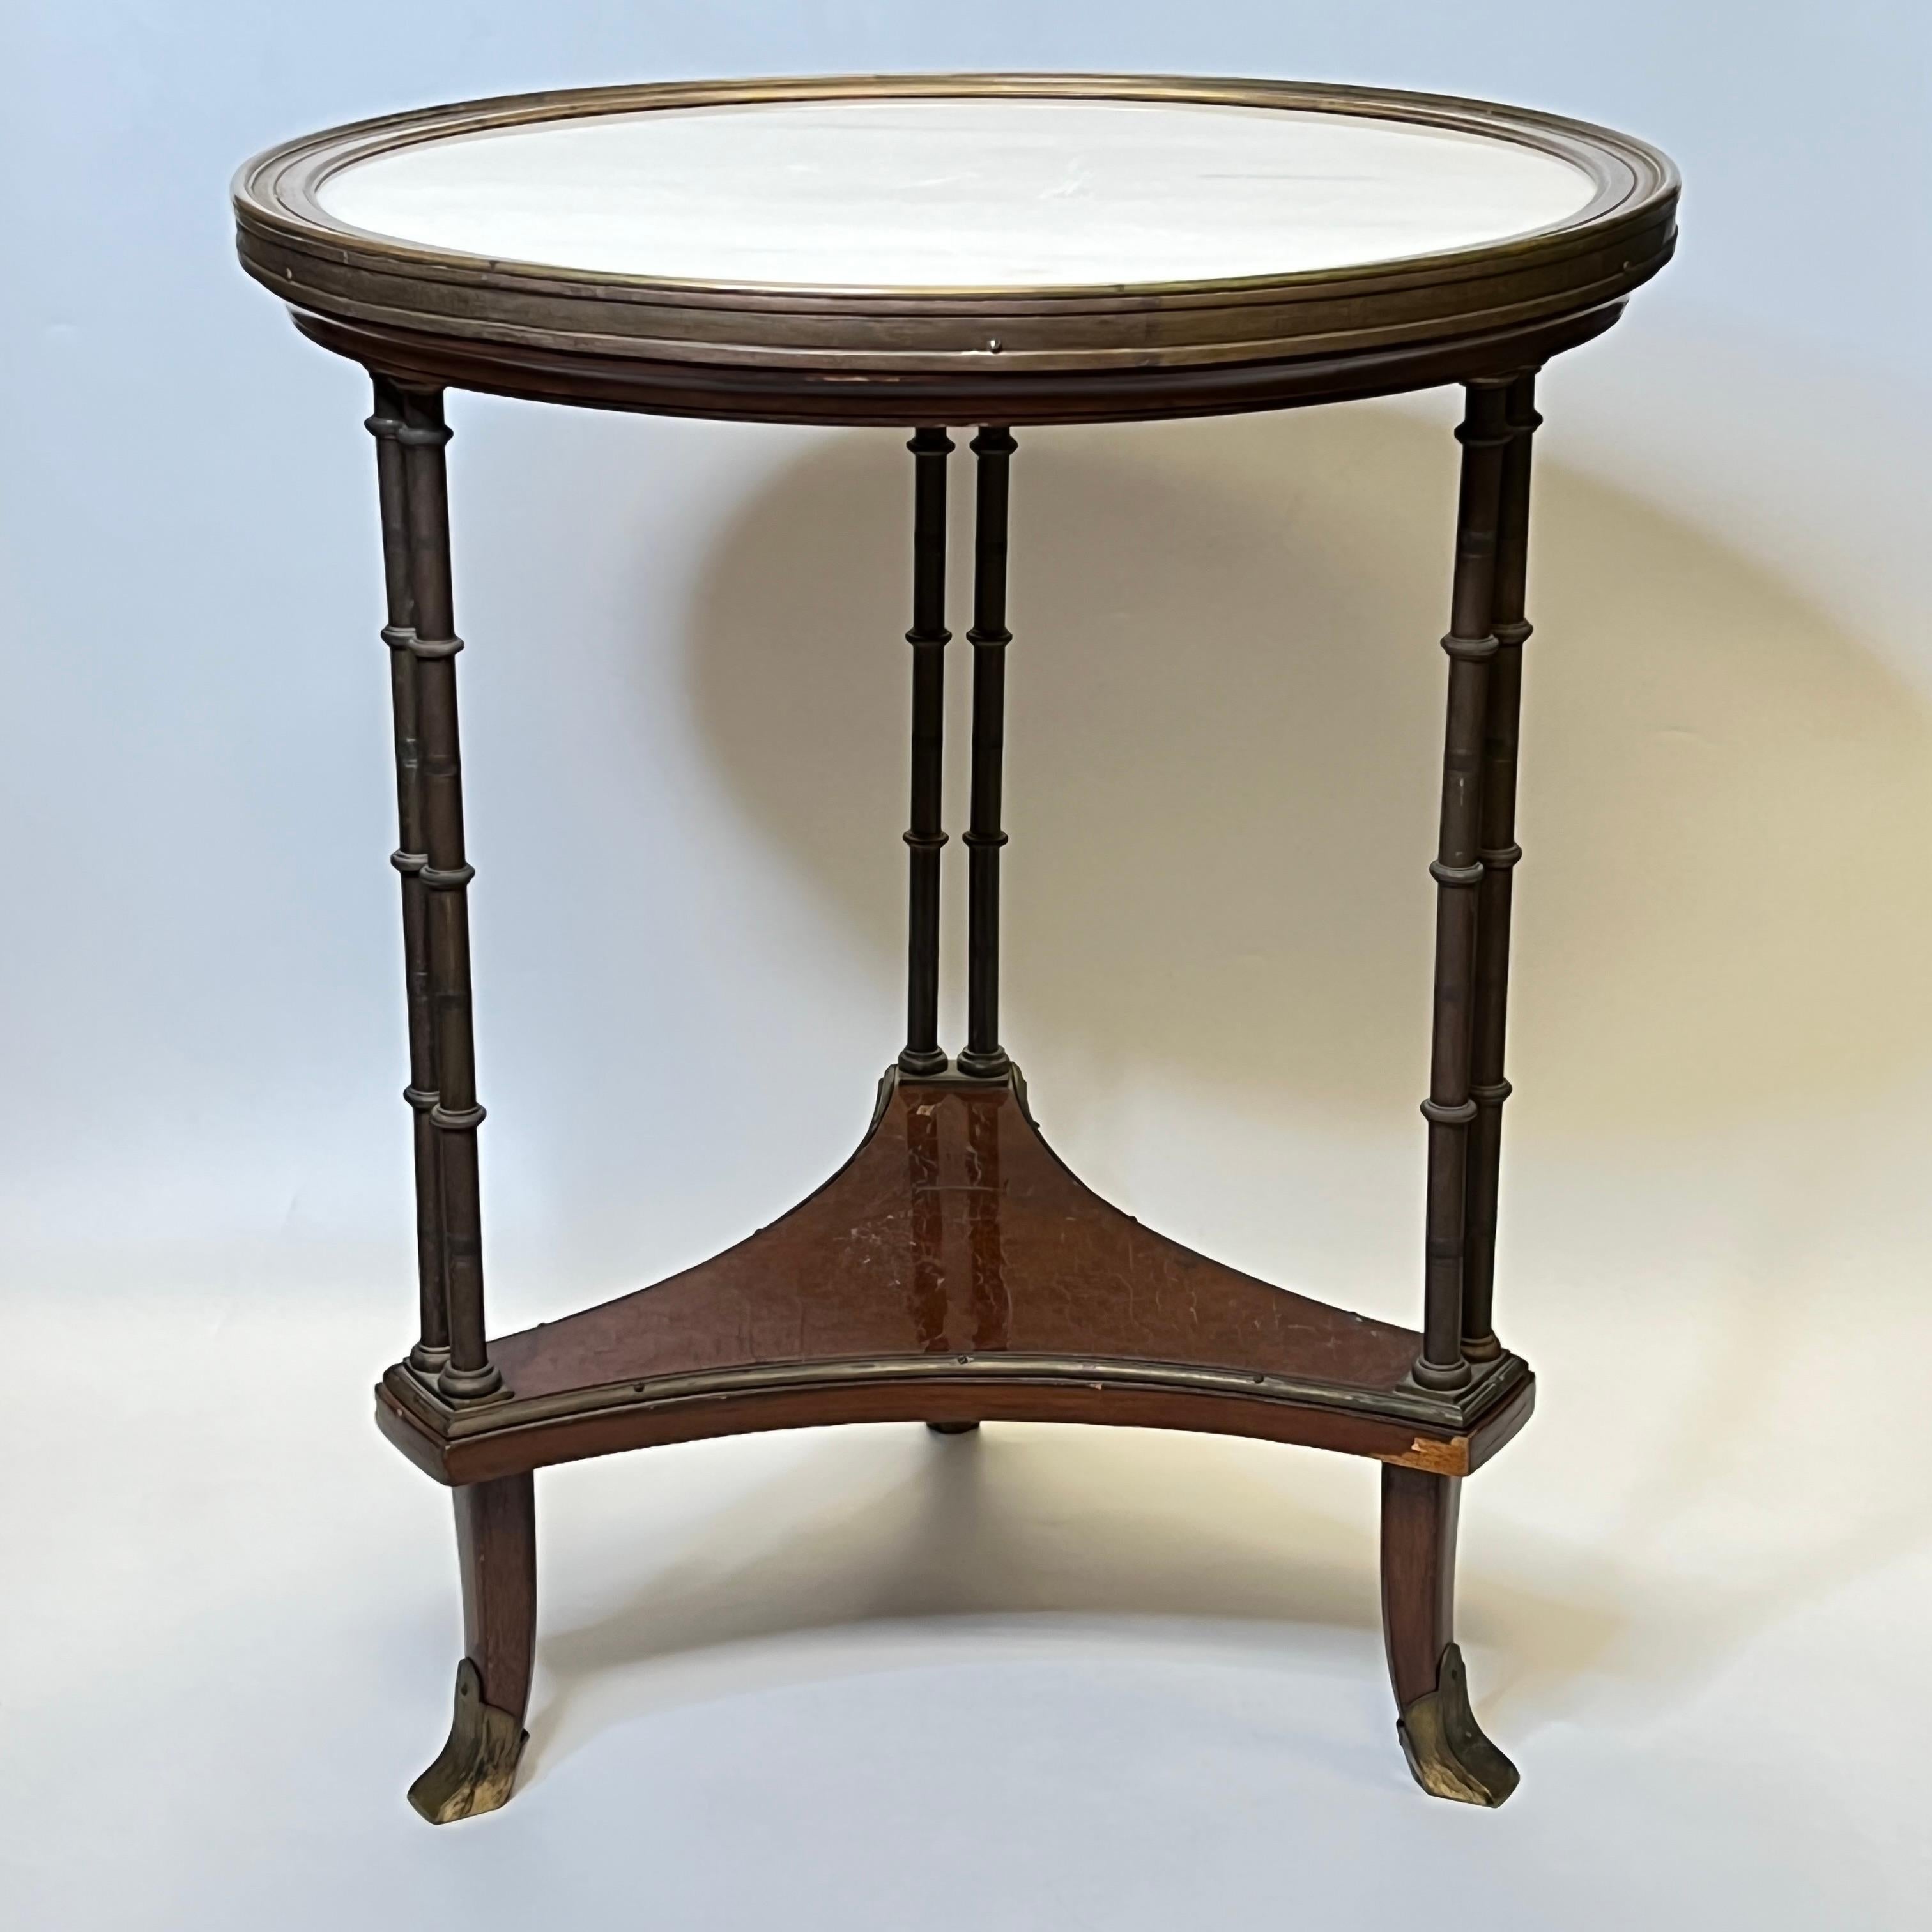 French Louis XVI Style Bronze and White Marble Gueridon Table with Bamboo Legs For Sale